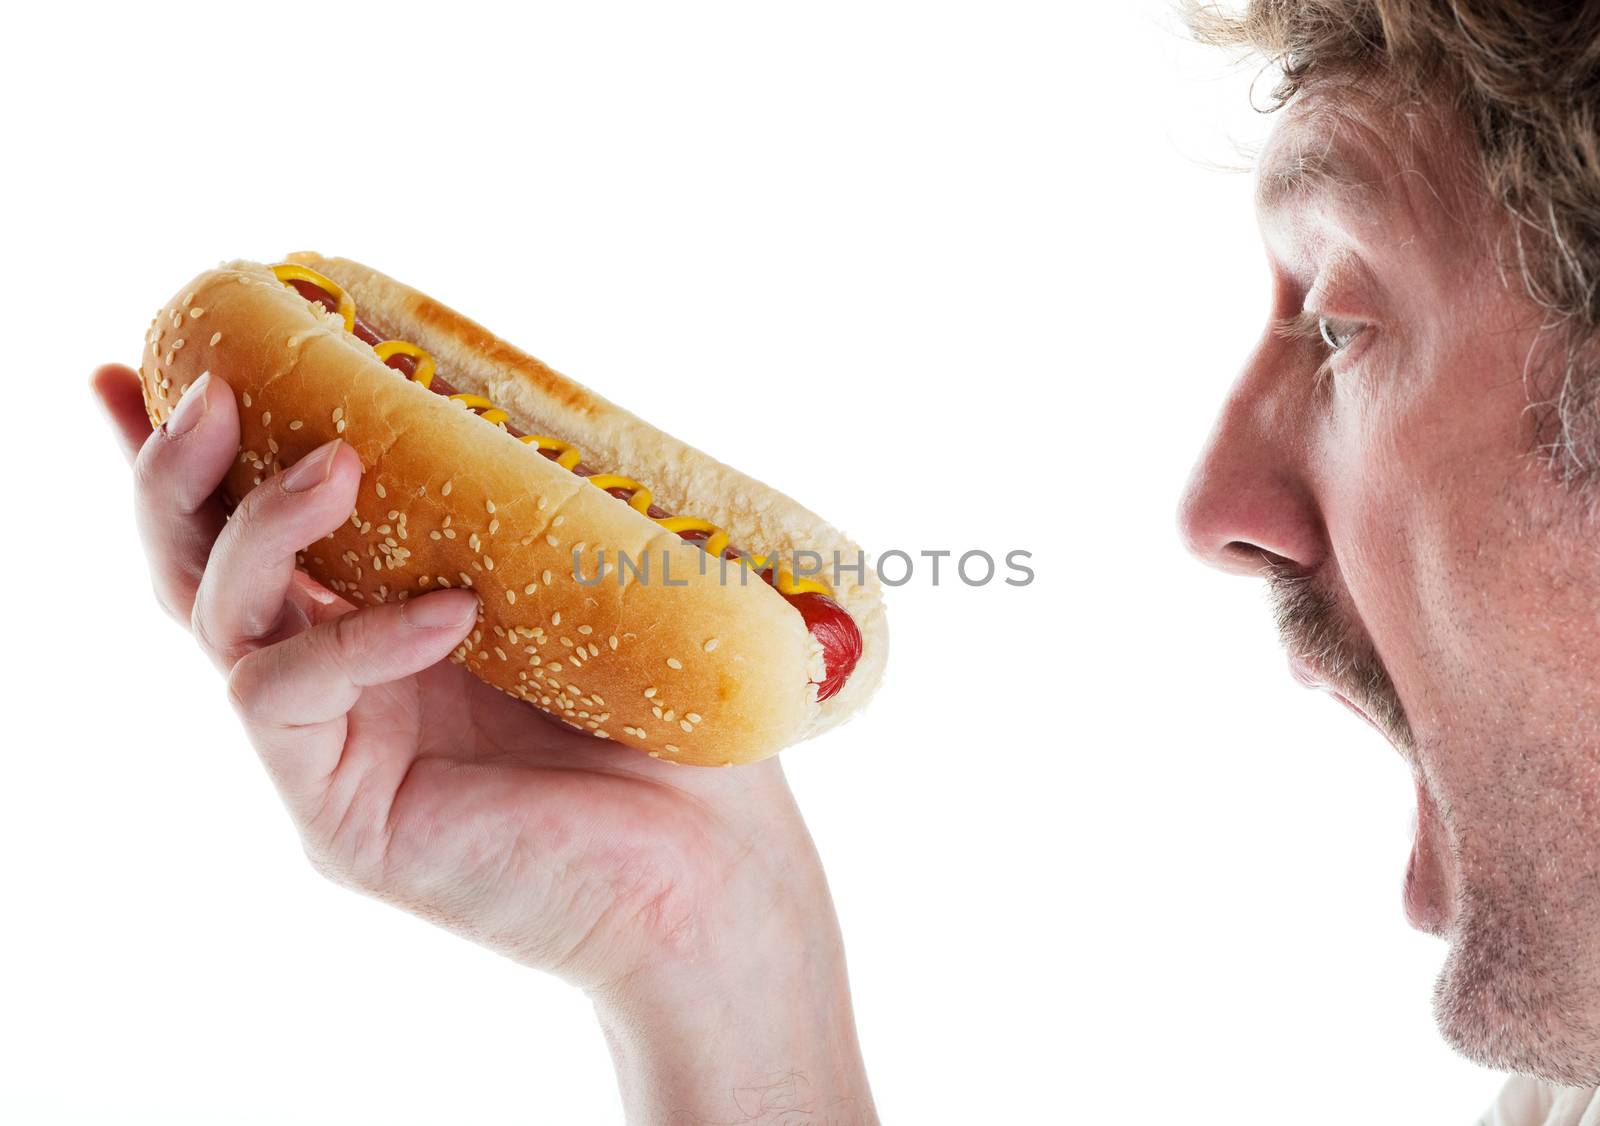 A hungry man can't wait to take a big bite of his delicious hot dog.